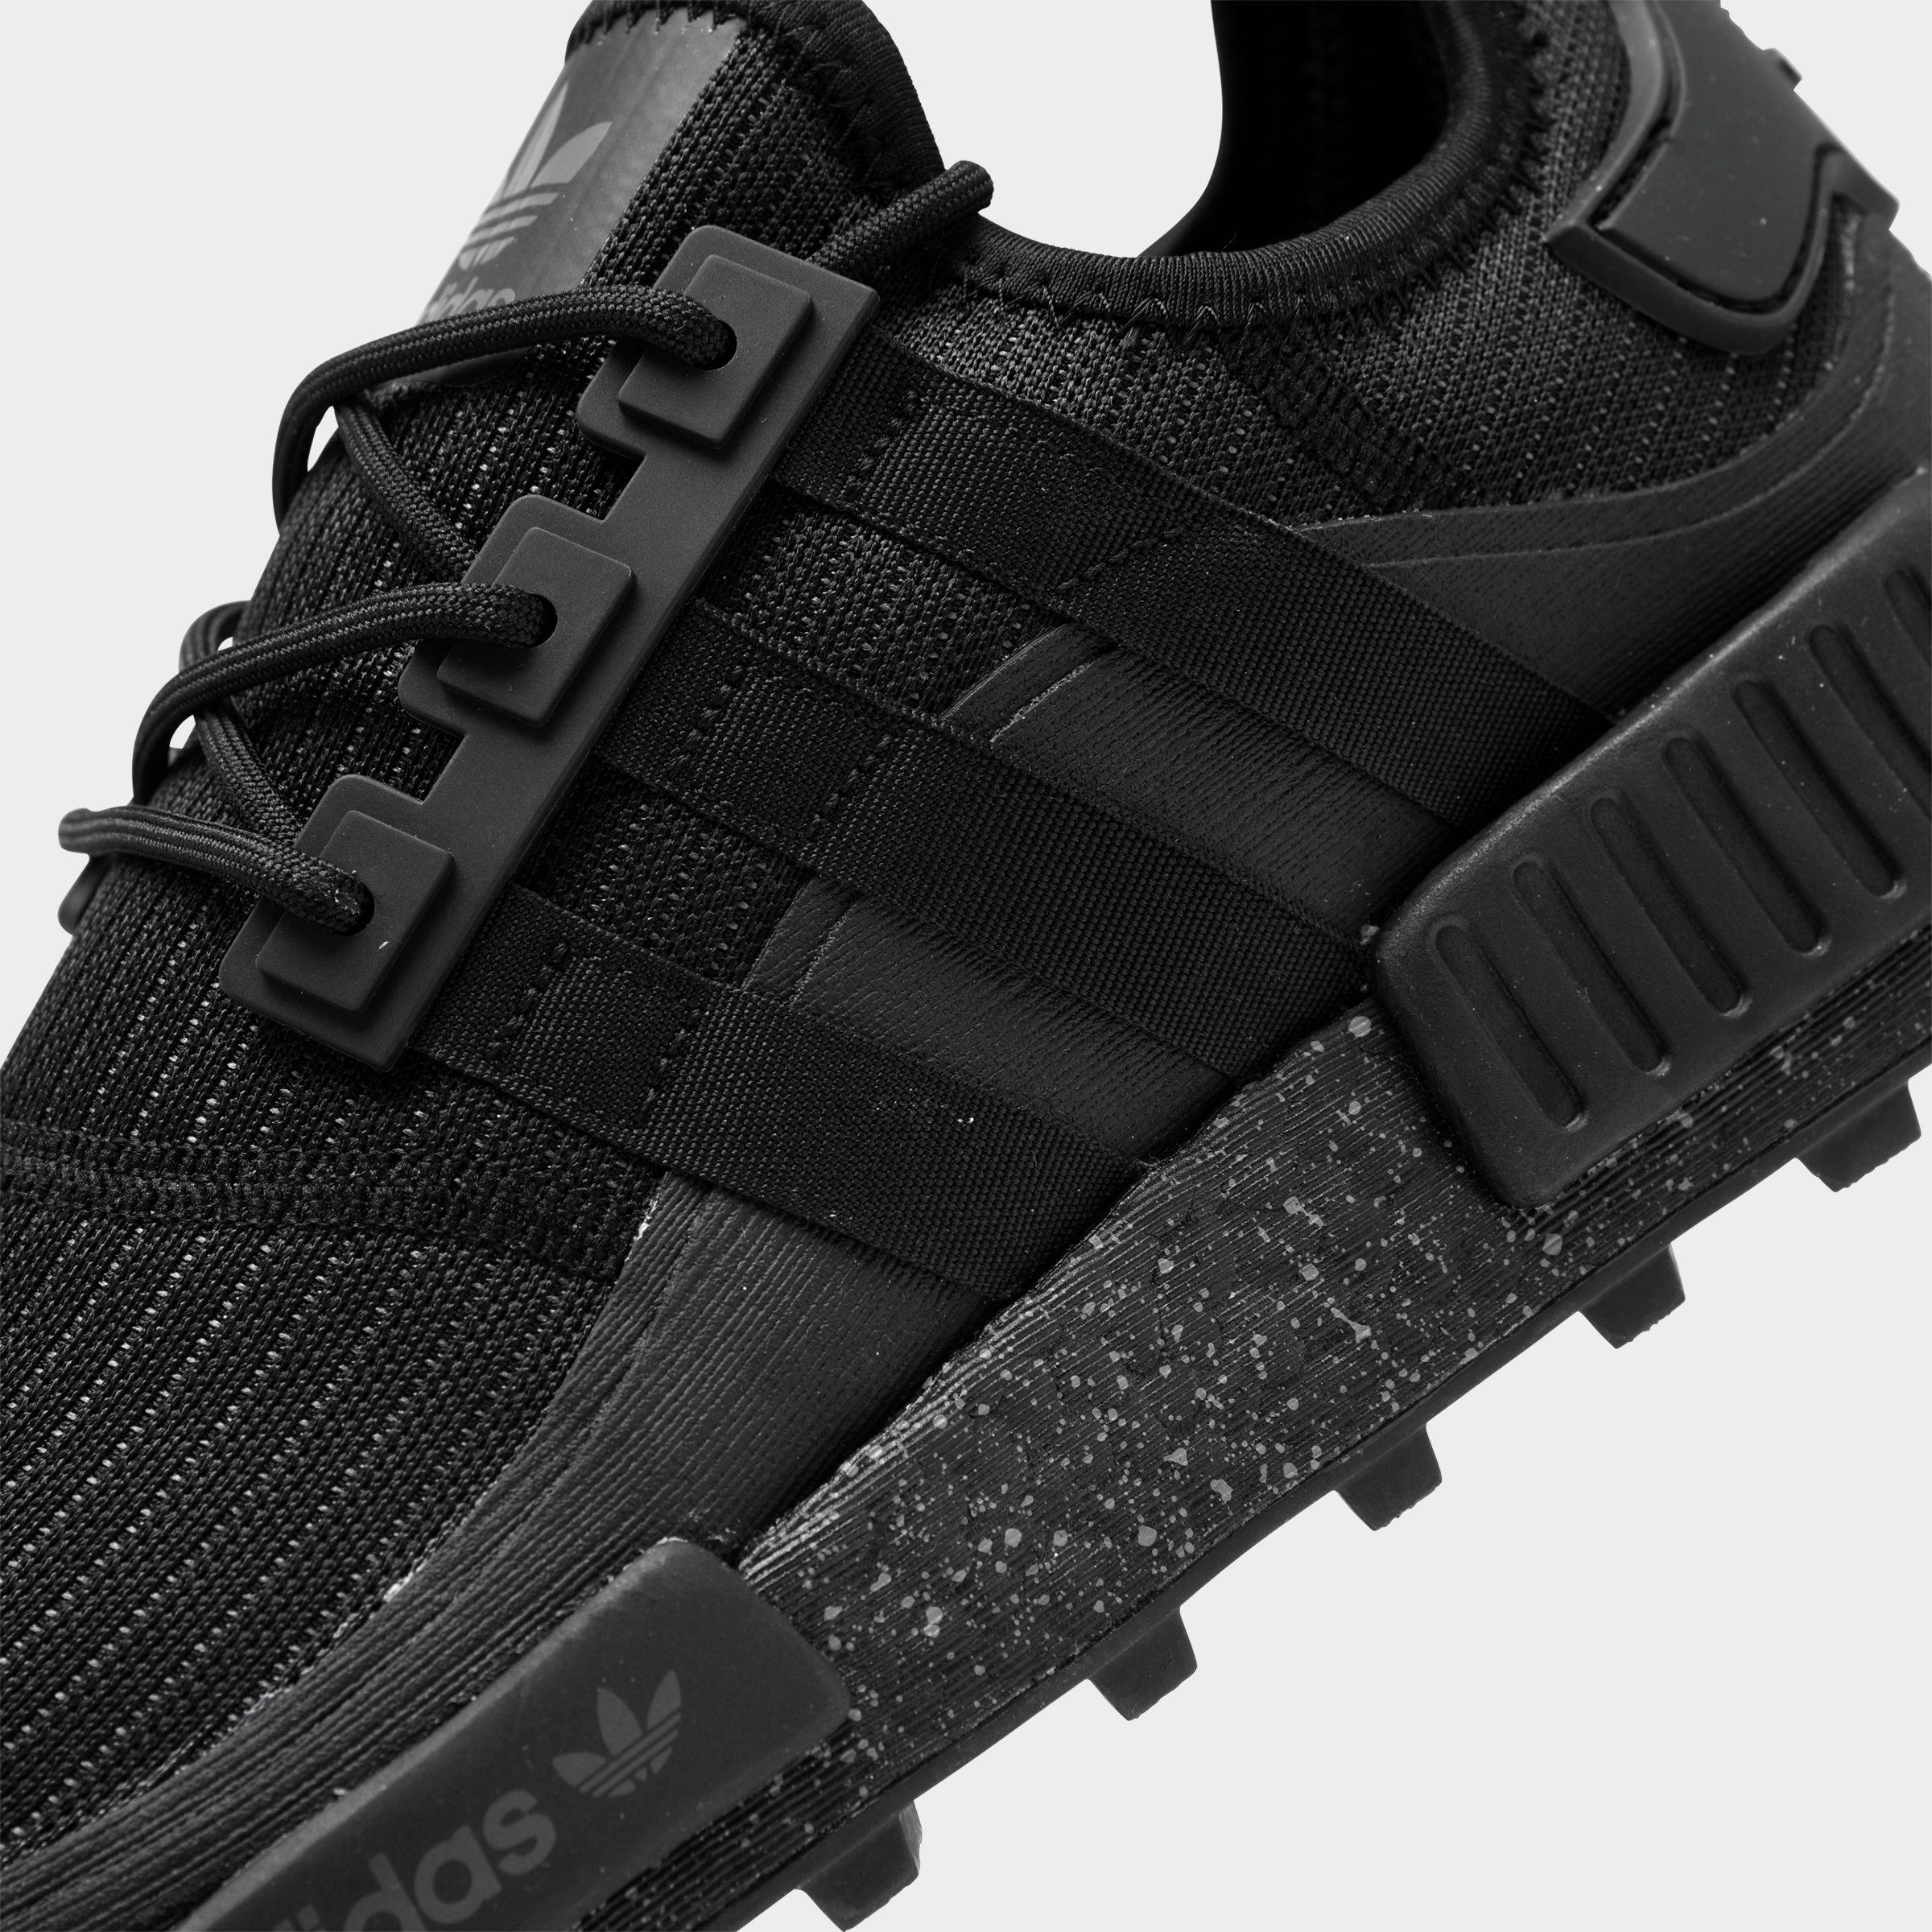 are nmds good running shoes